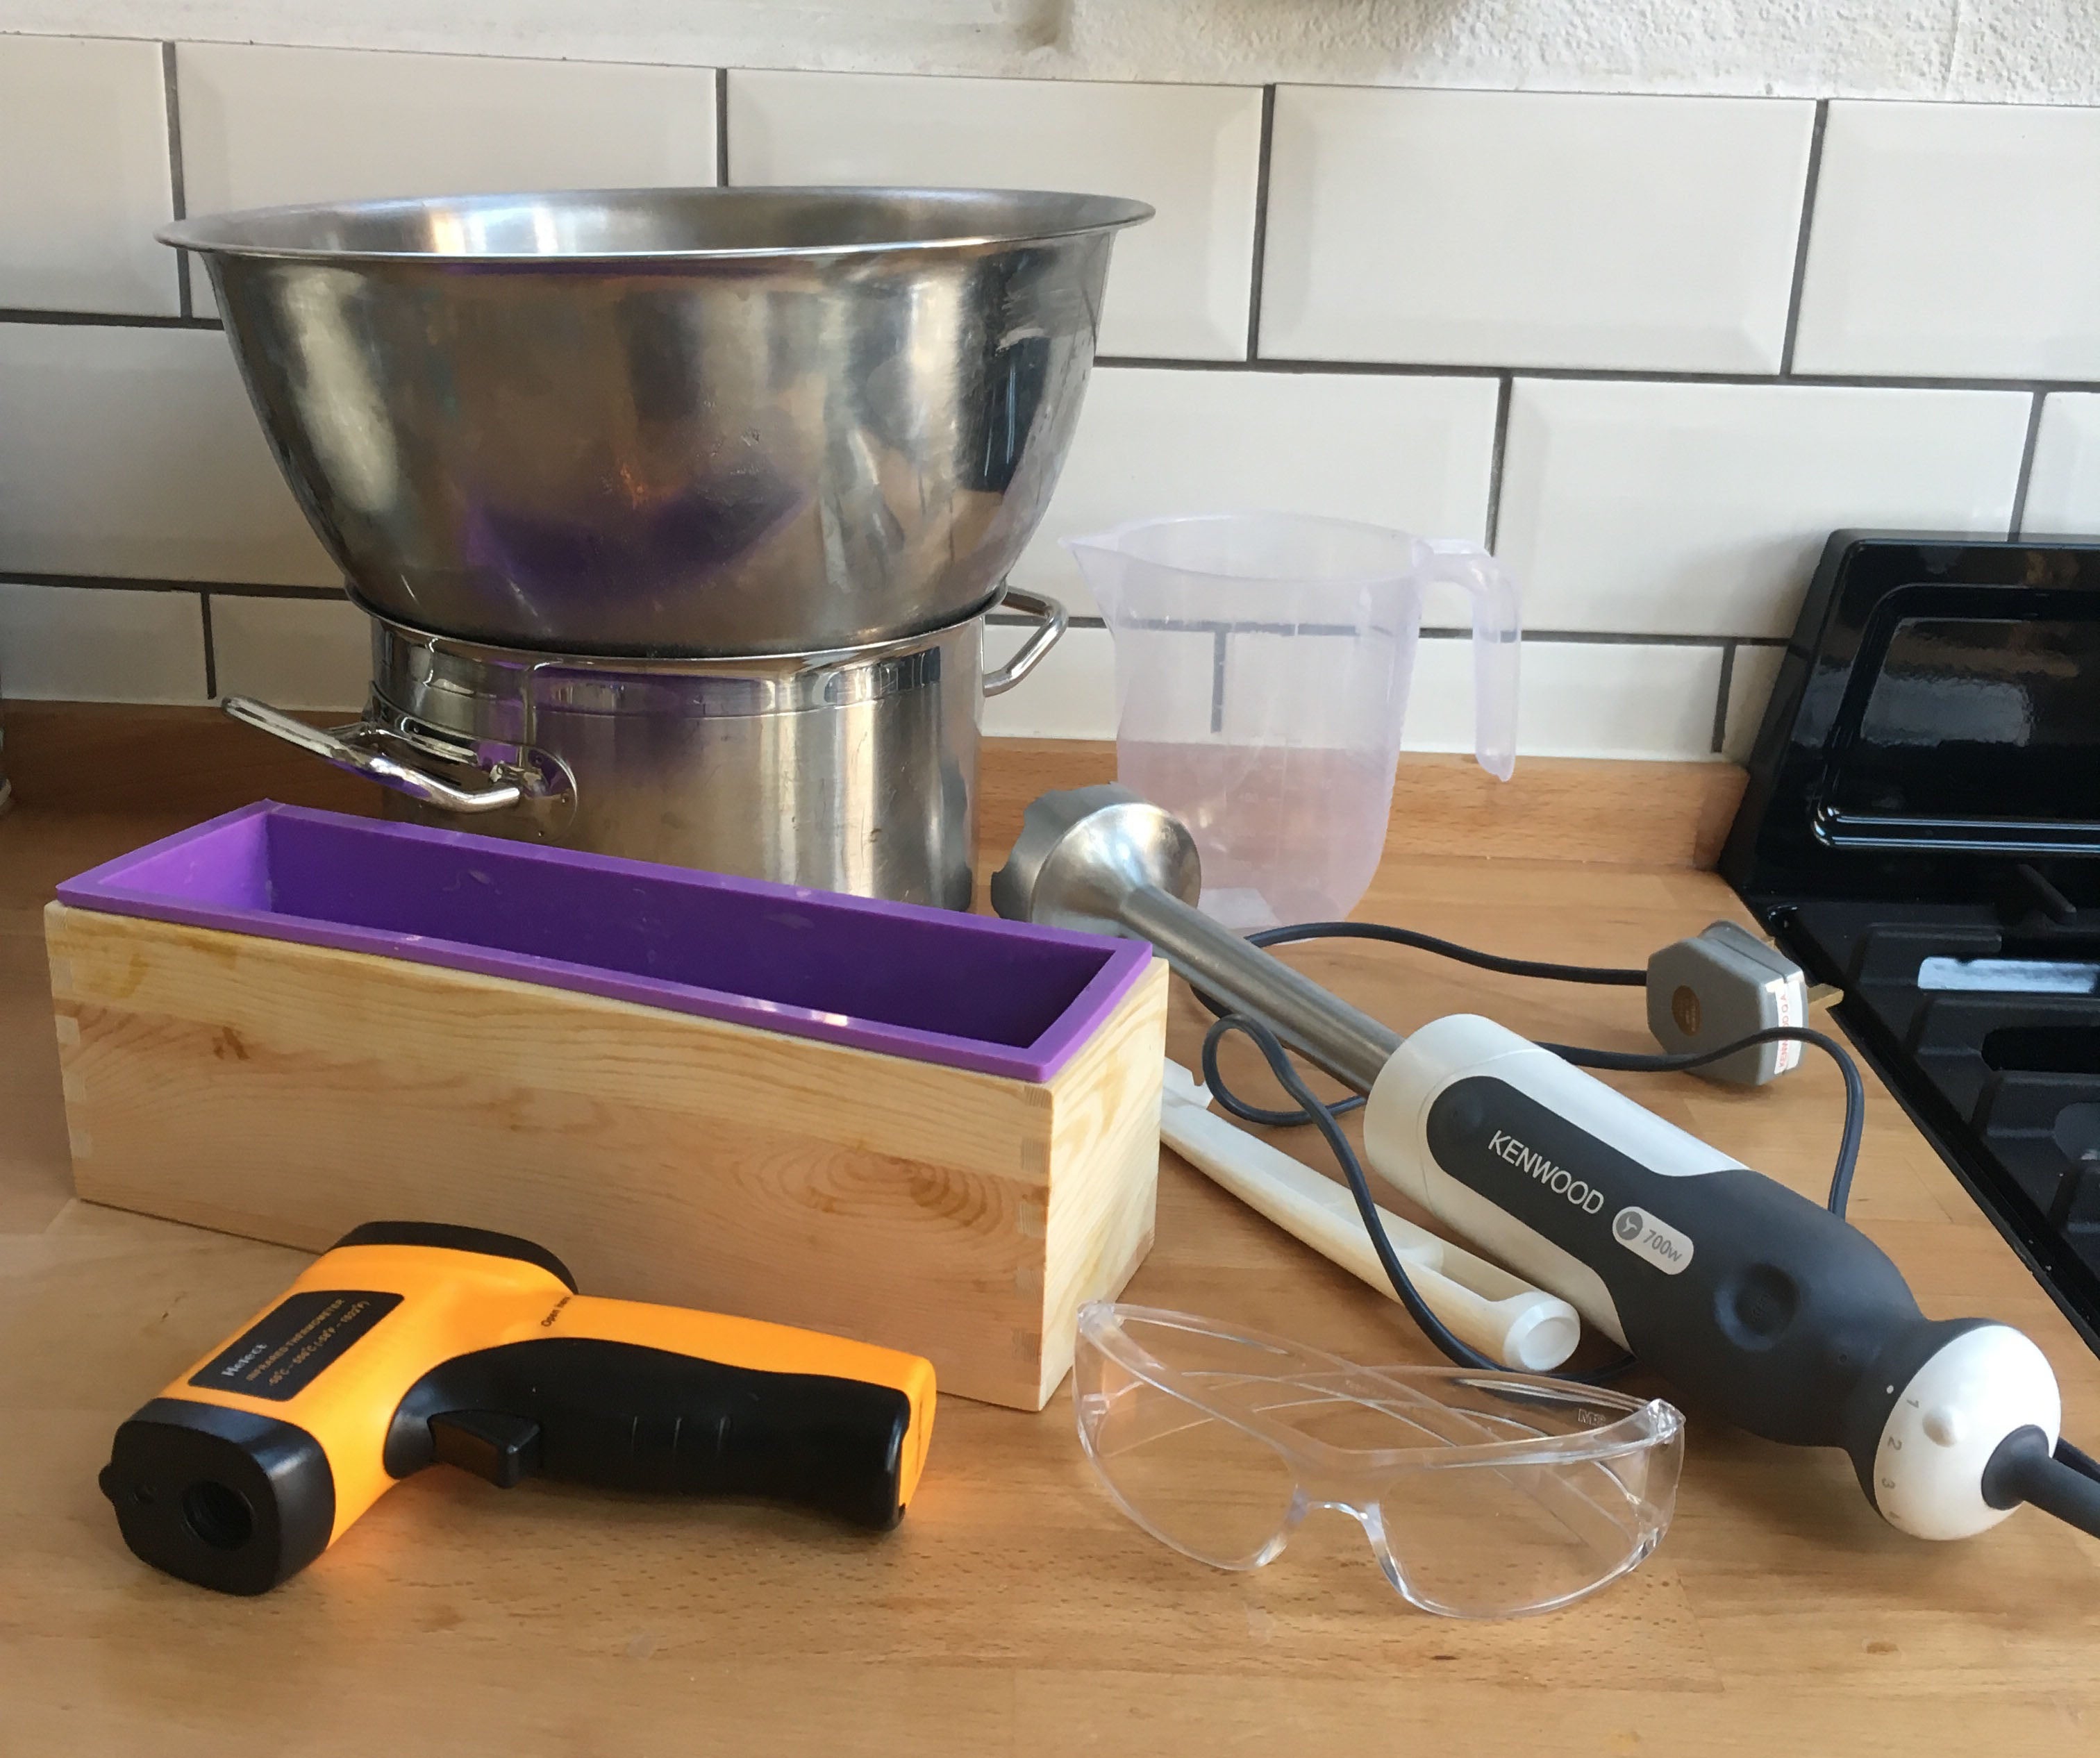 Basic Equipment needed for soap making at home – Almost Off Grid